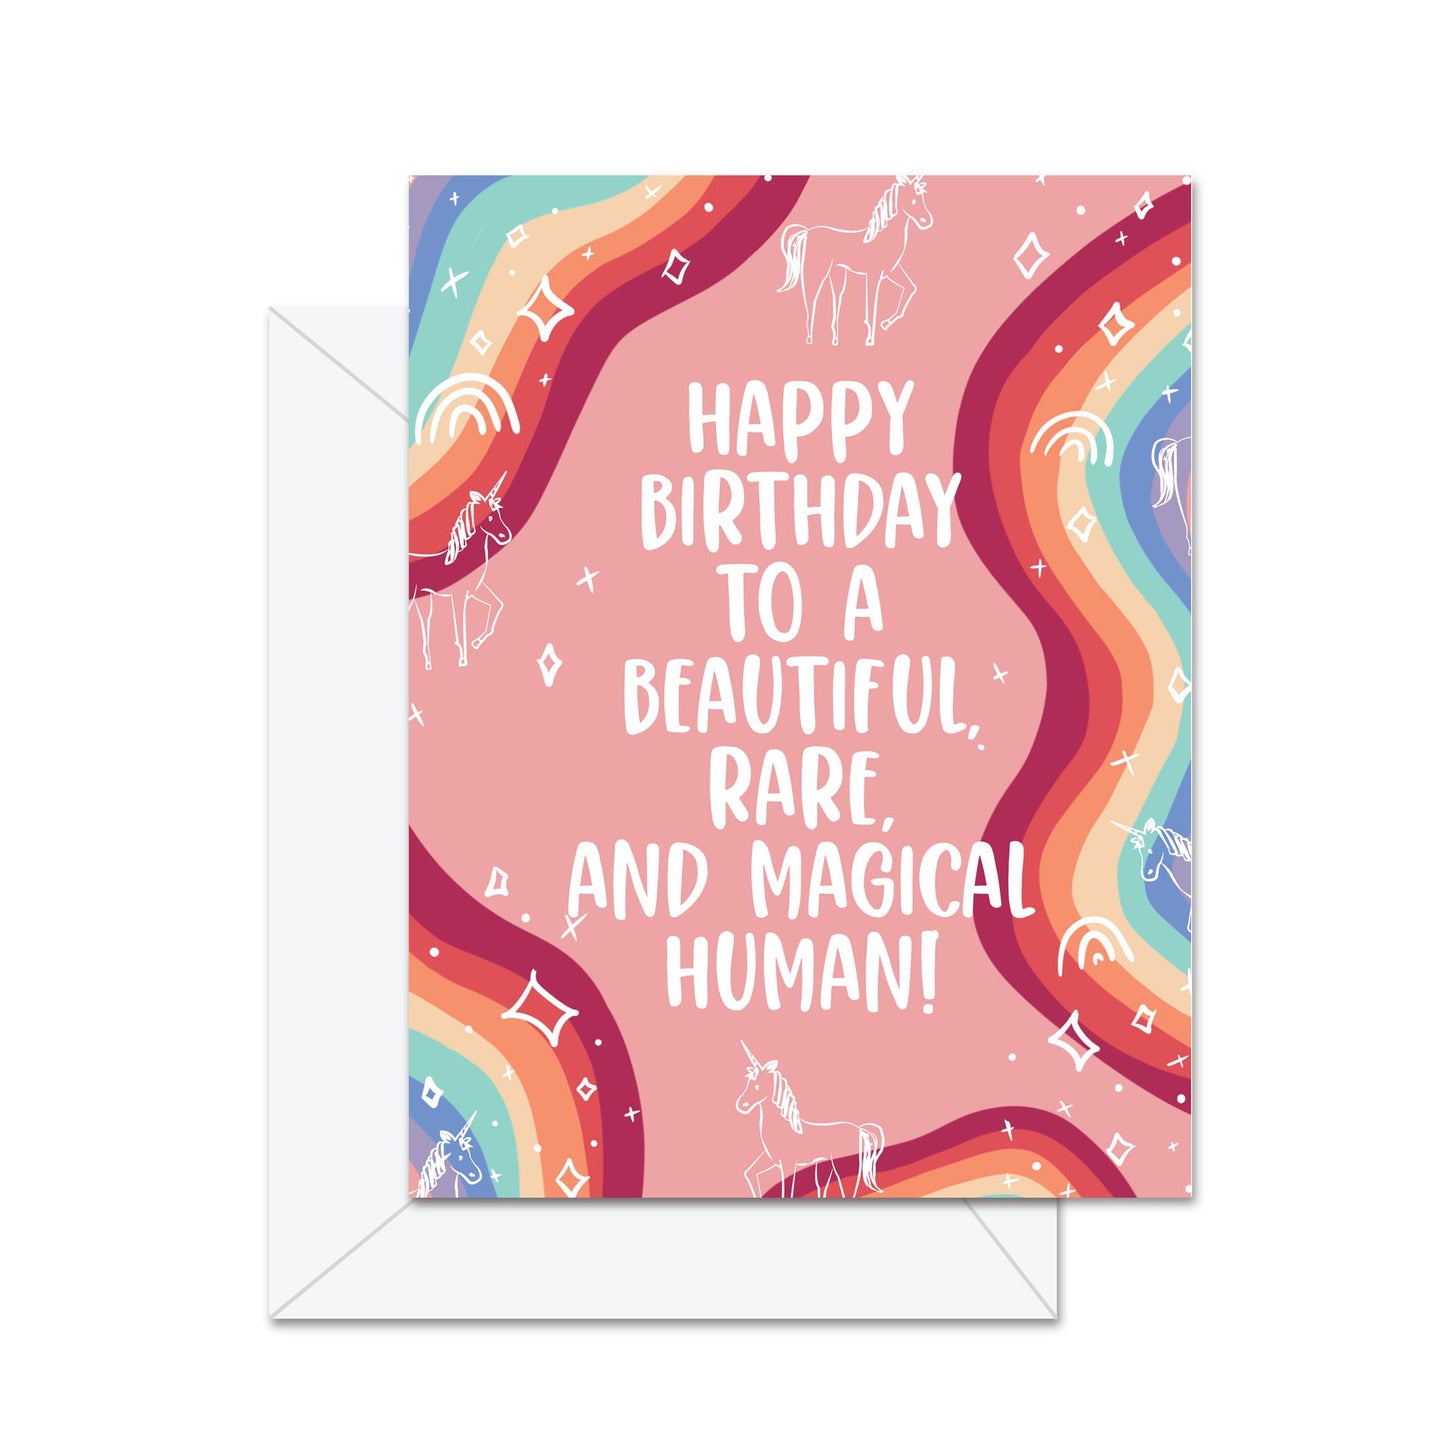 Happy Birthday To A Beautiful, Rare, And Magical Human!   - Greeting Card